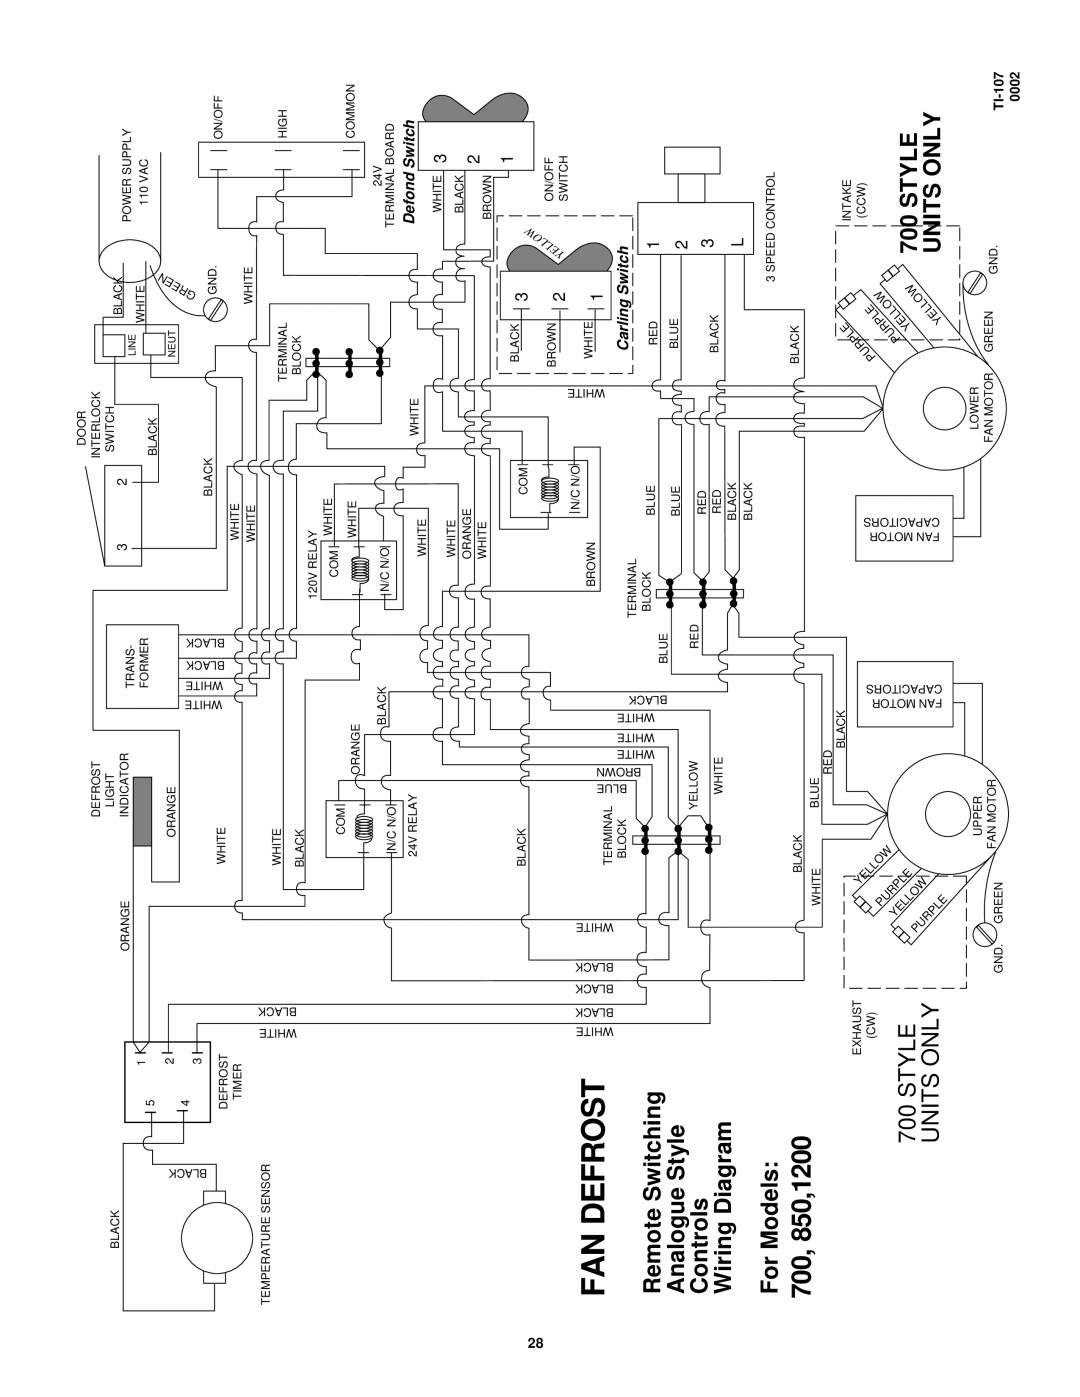 Lifebreath 850FD/DD 700, 850,1200, Remote Switching Analogue Style Controls, Wiring Diagram For Models, Fan Defrost, 0002 